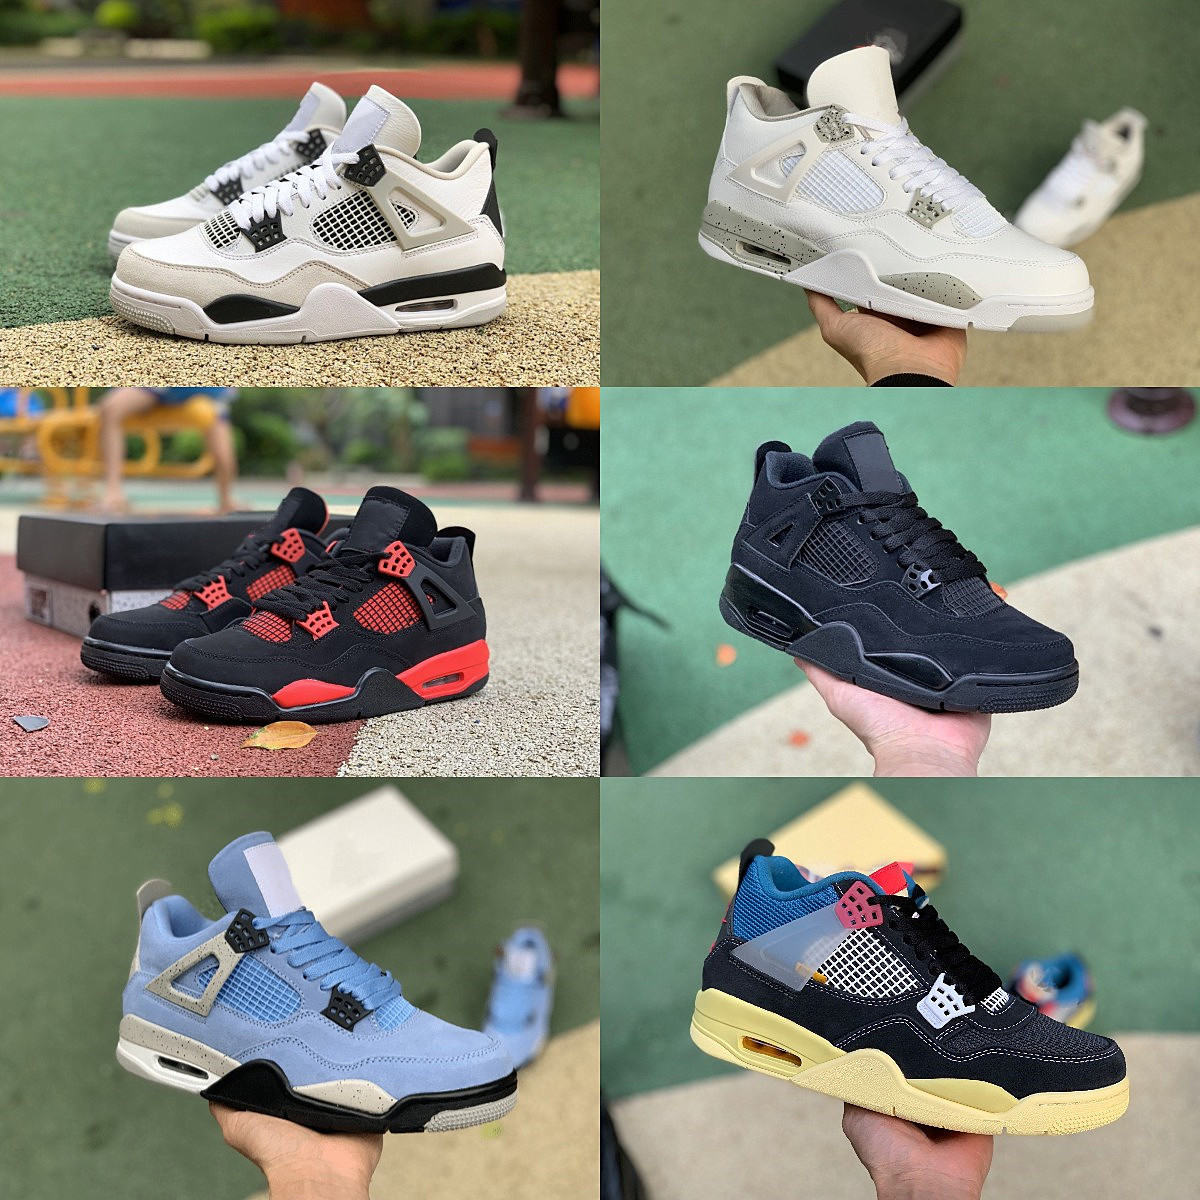 

2022 Jumpman Red Thunder 4 4s Basketball Shoes University Blue Mens Military Black Cement Cat Cream Sail White Oreo Bred Infrared Cool Grey Tattoo Trainer Sneakers S8, Please contact us